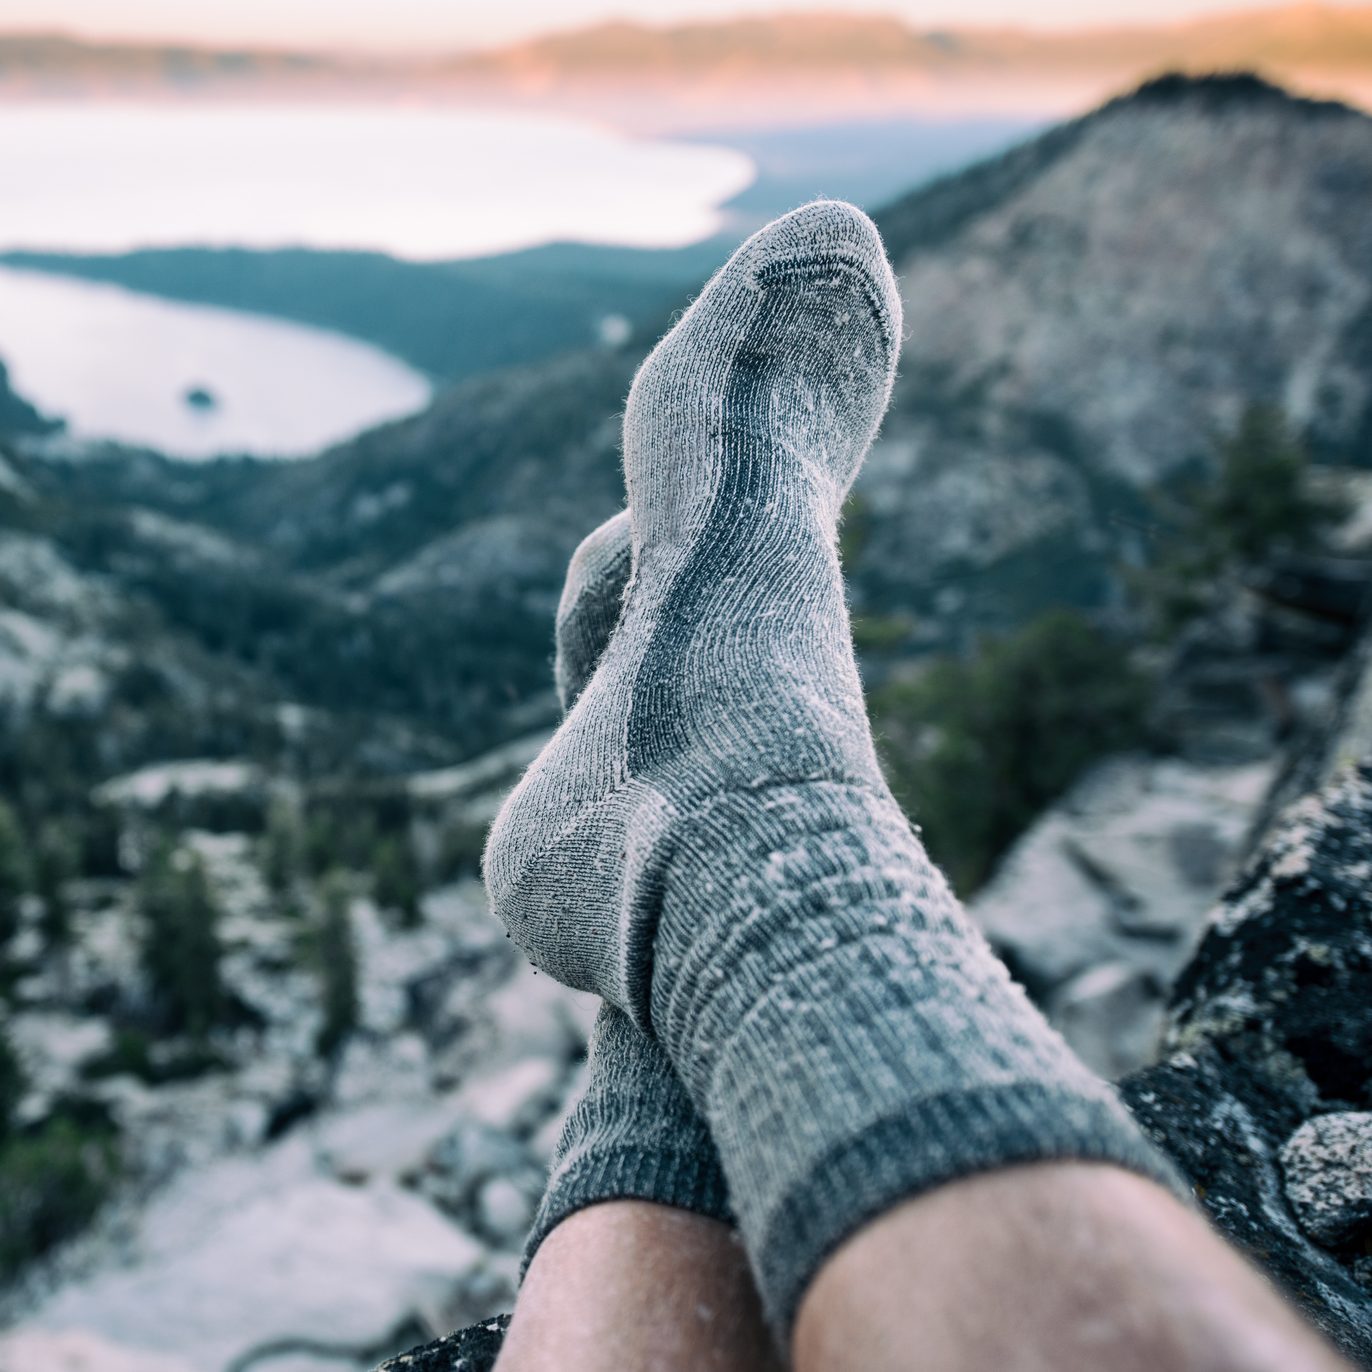 Shop the Toughest Socks Online and Save Up to 50% During These Rare Sock Sales